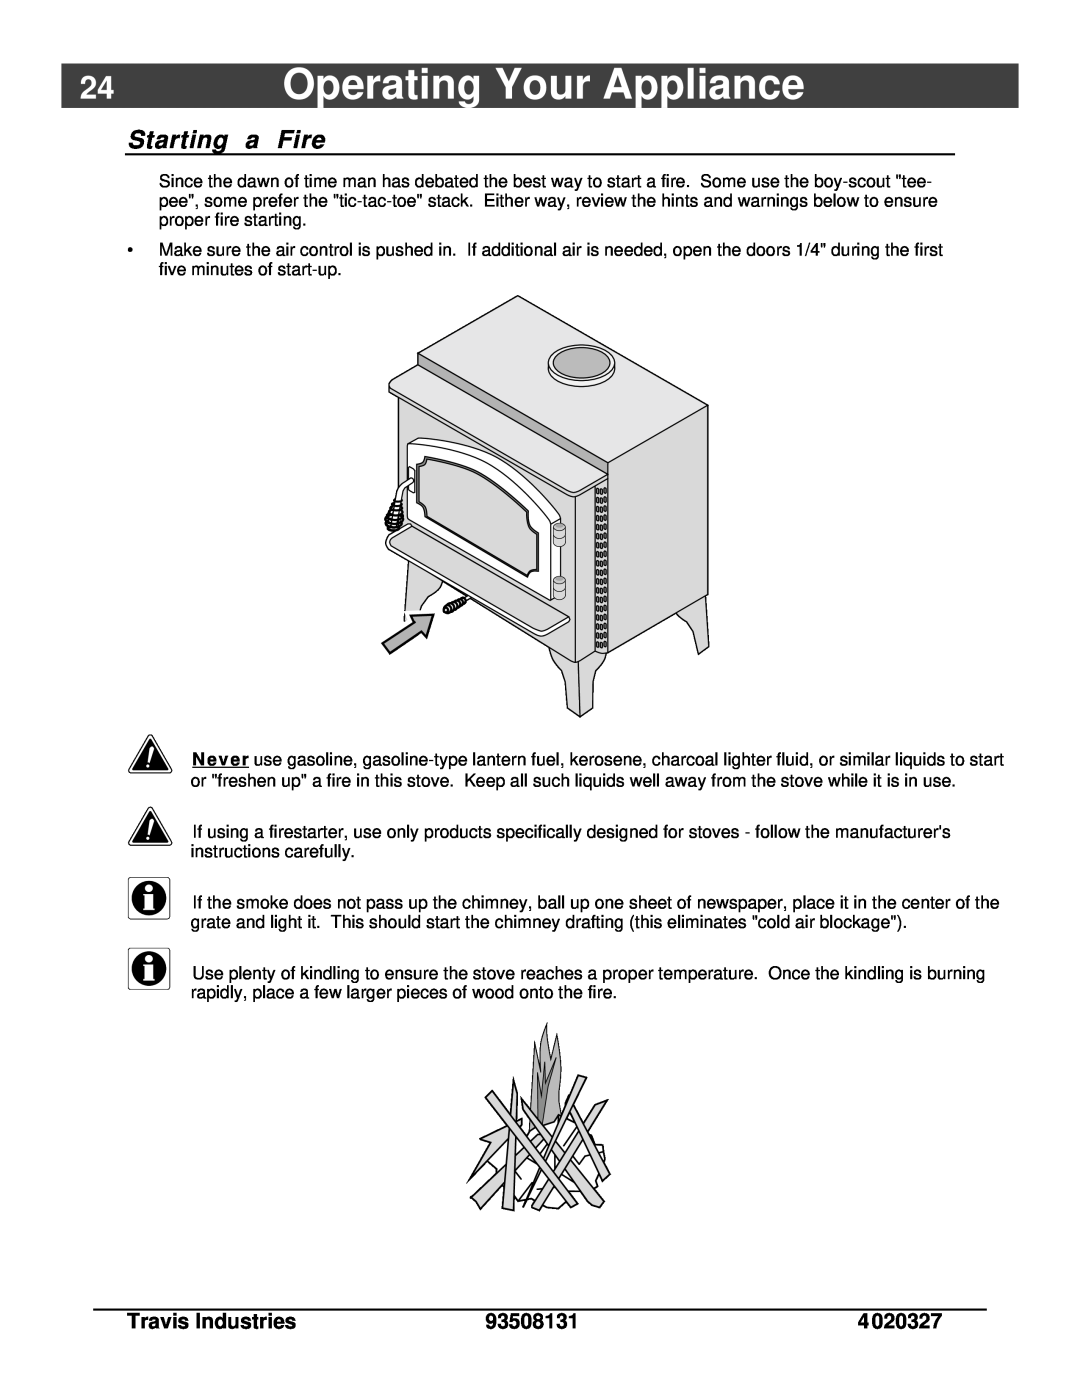 Lopi Answer Wood Stove owner manual Operating Your Appliance, Starting a Fire 